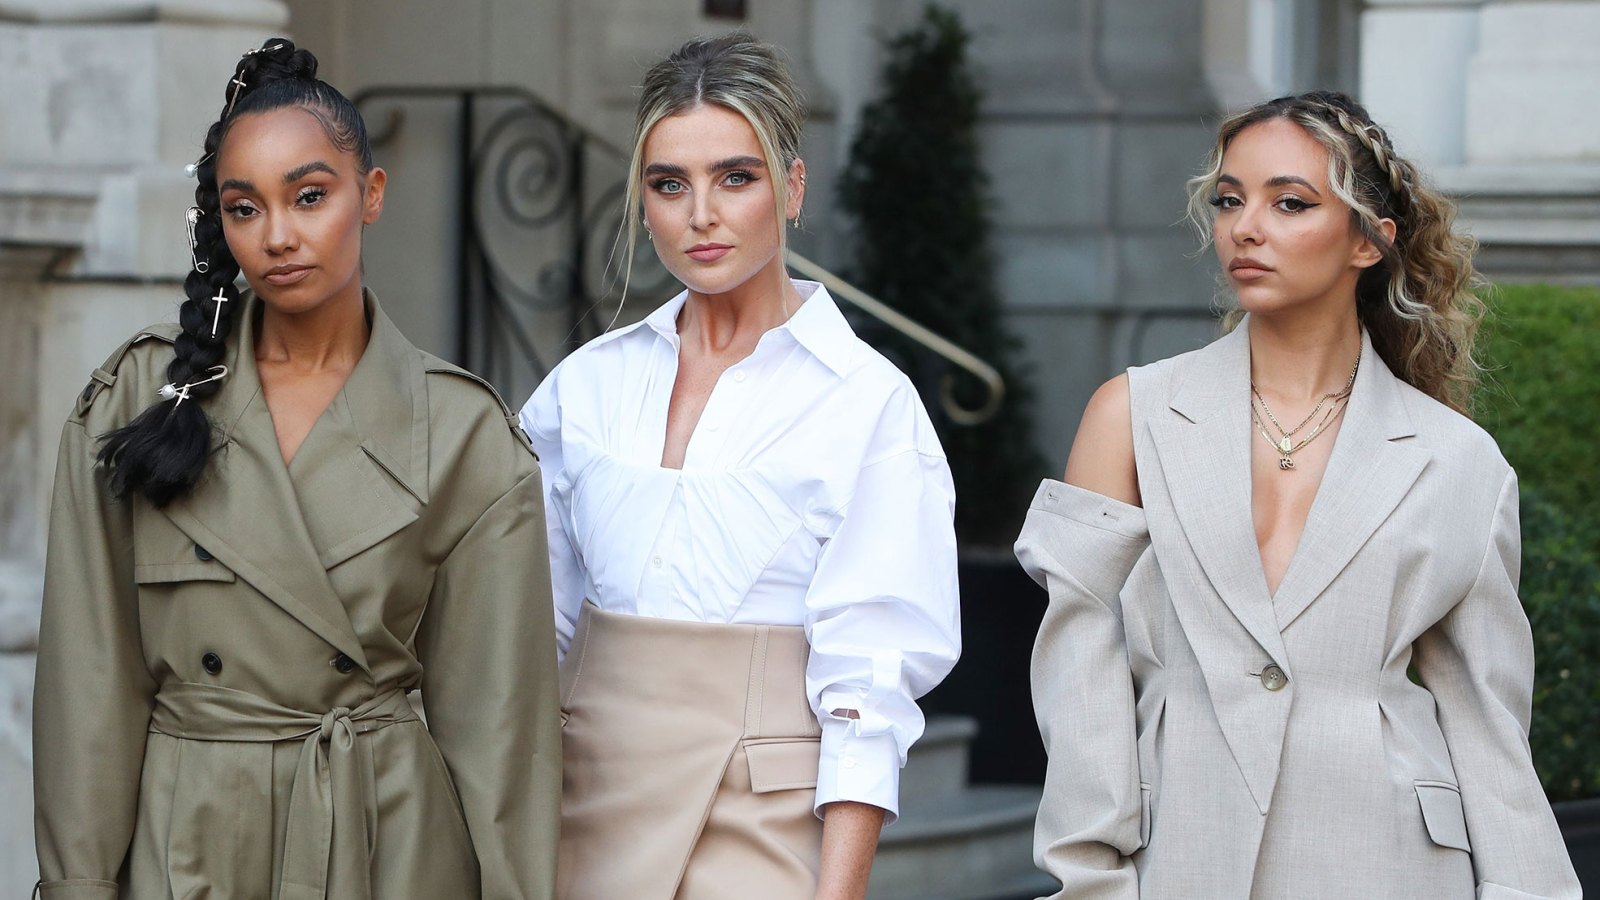 Little Mix’s Jade Thirlwall Perrie Edwards and Leigh-Anne Pinnock Are Taking a Break After Their 2022 Confetti Tour